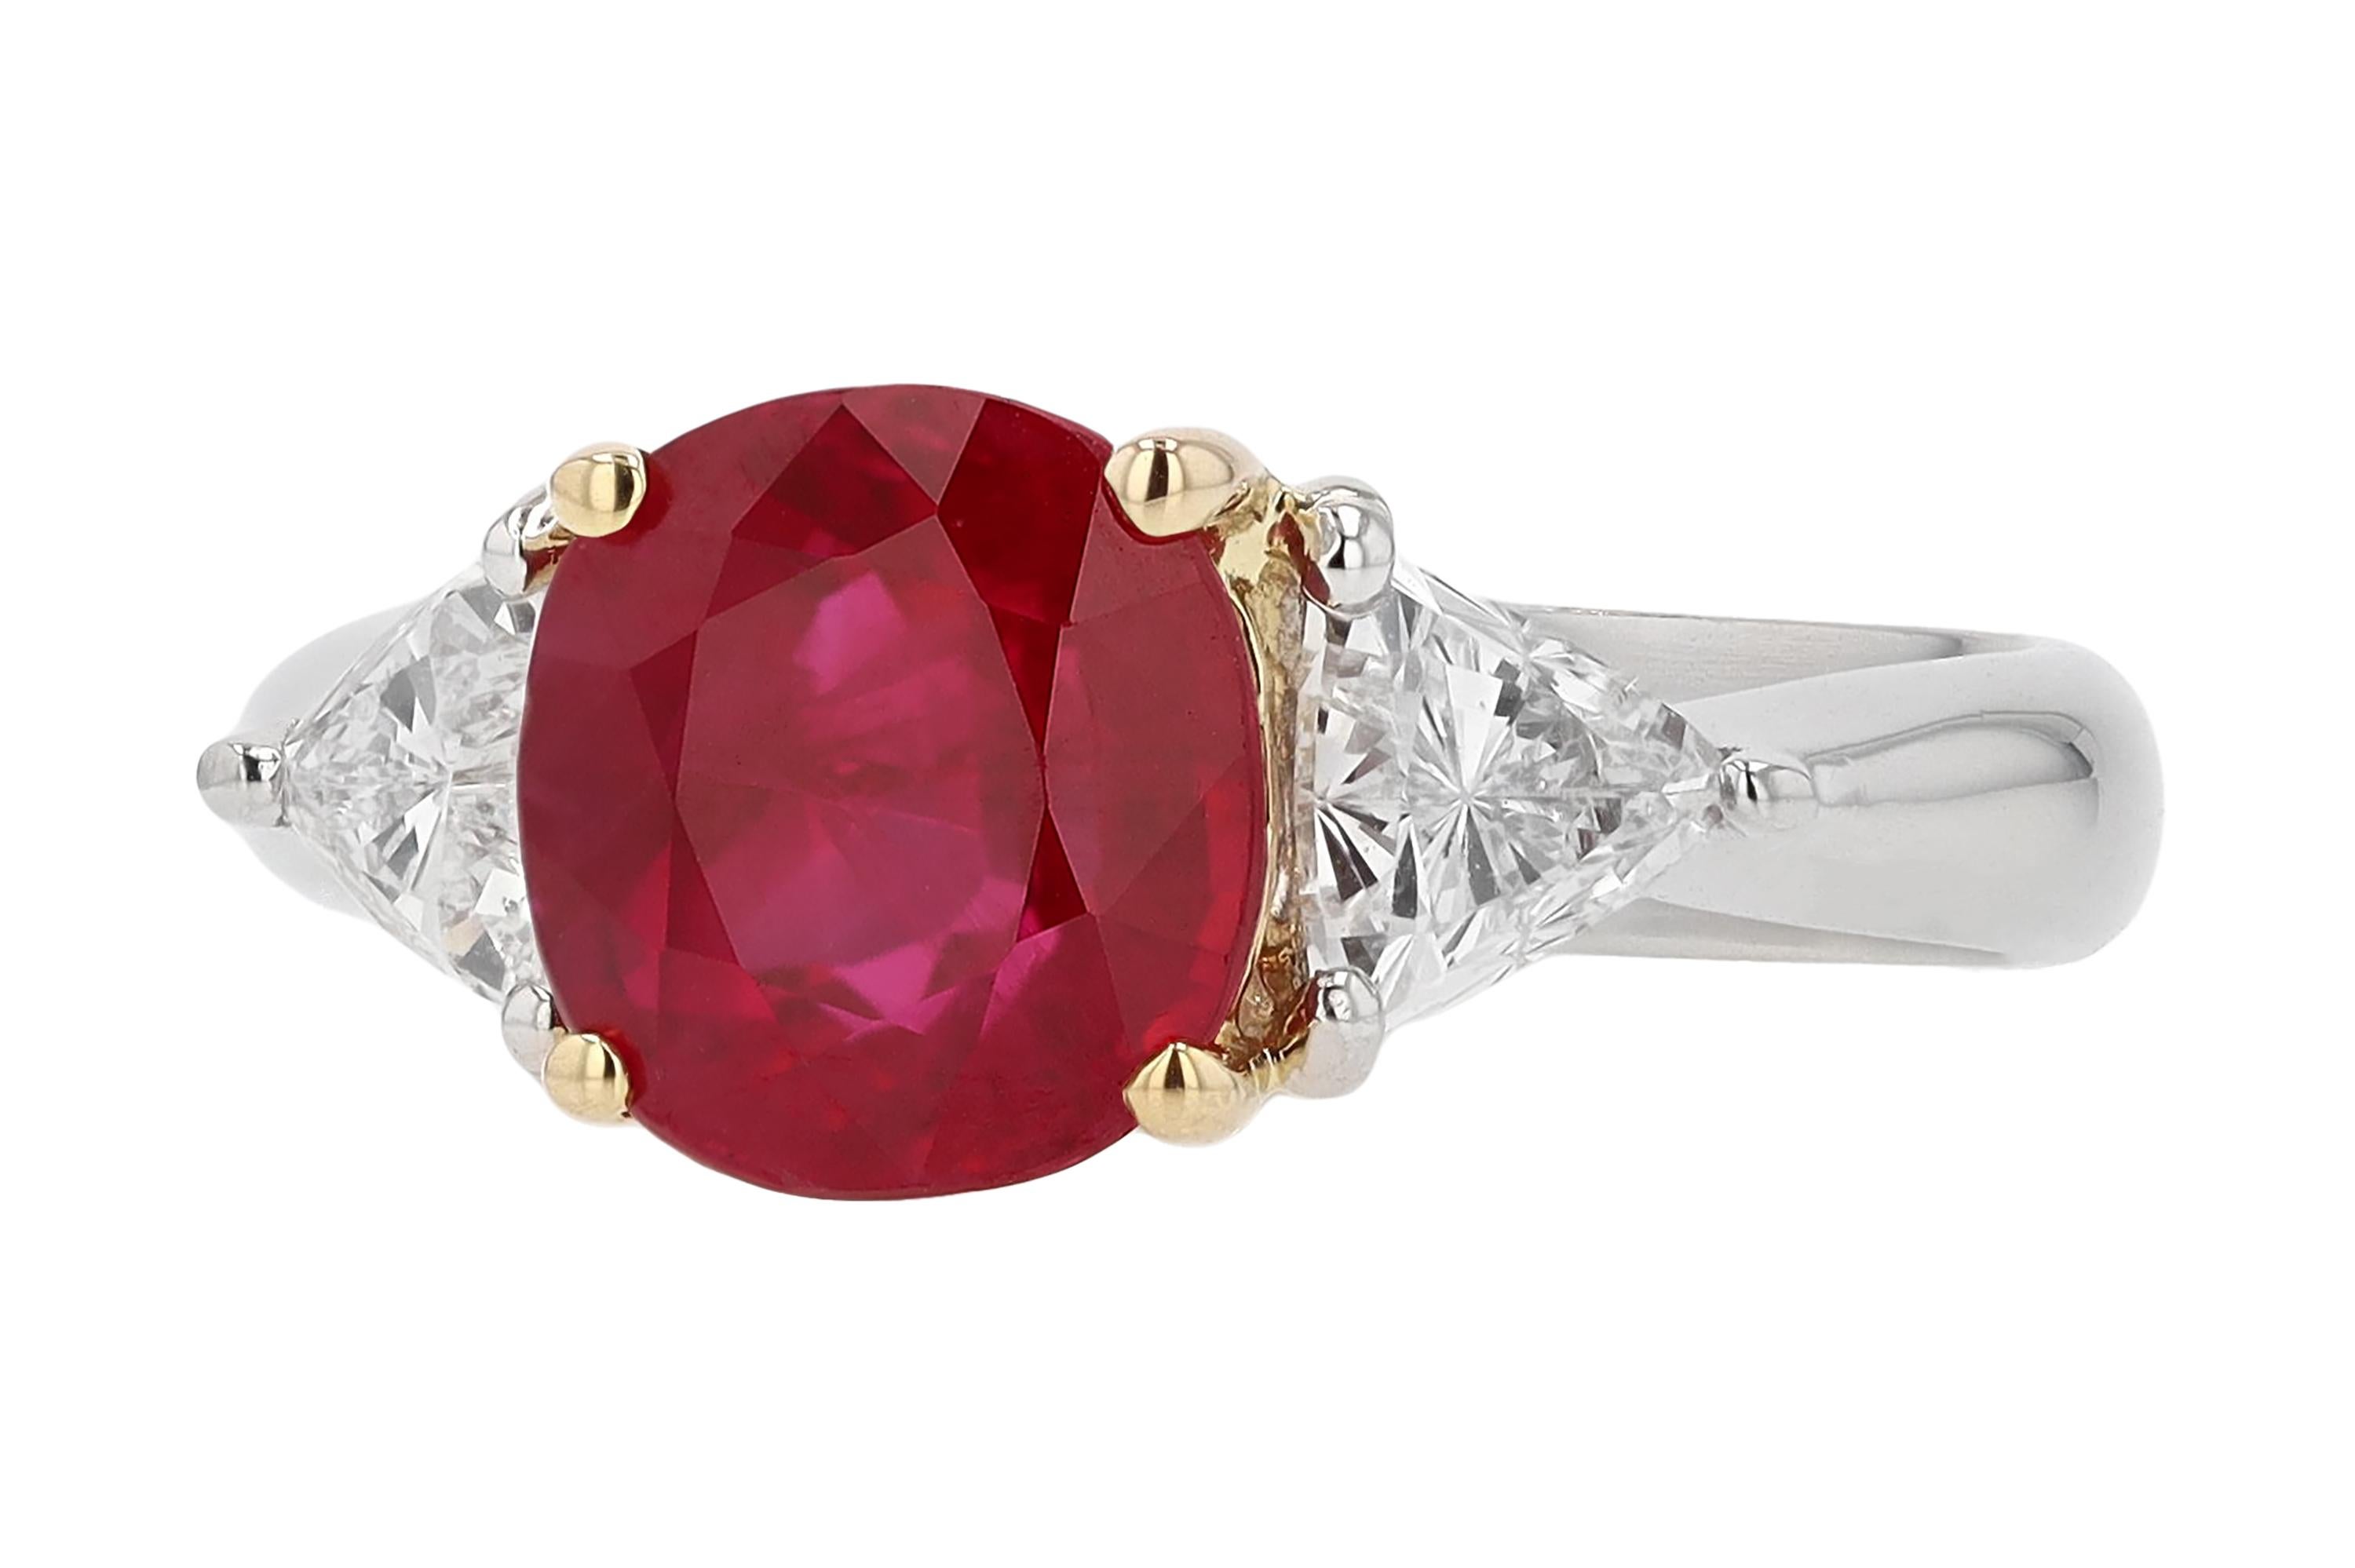 Oval Cut GIA Certified 3 Carat Pigeon Blood Burma Ruby Engagement Ring For Sale